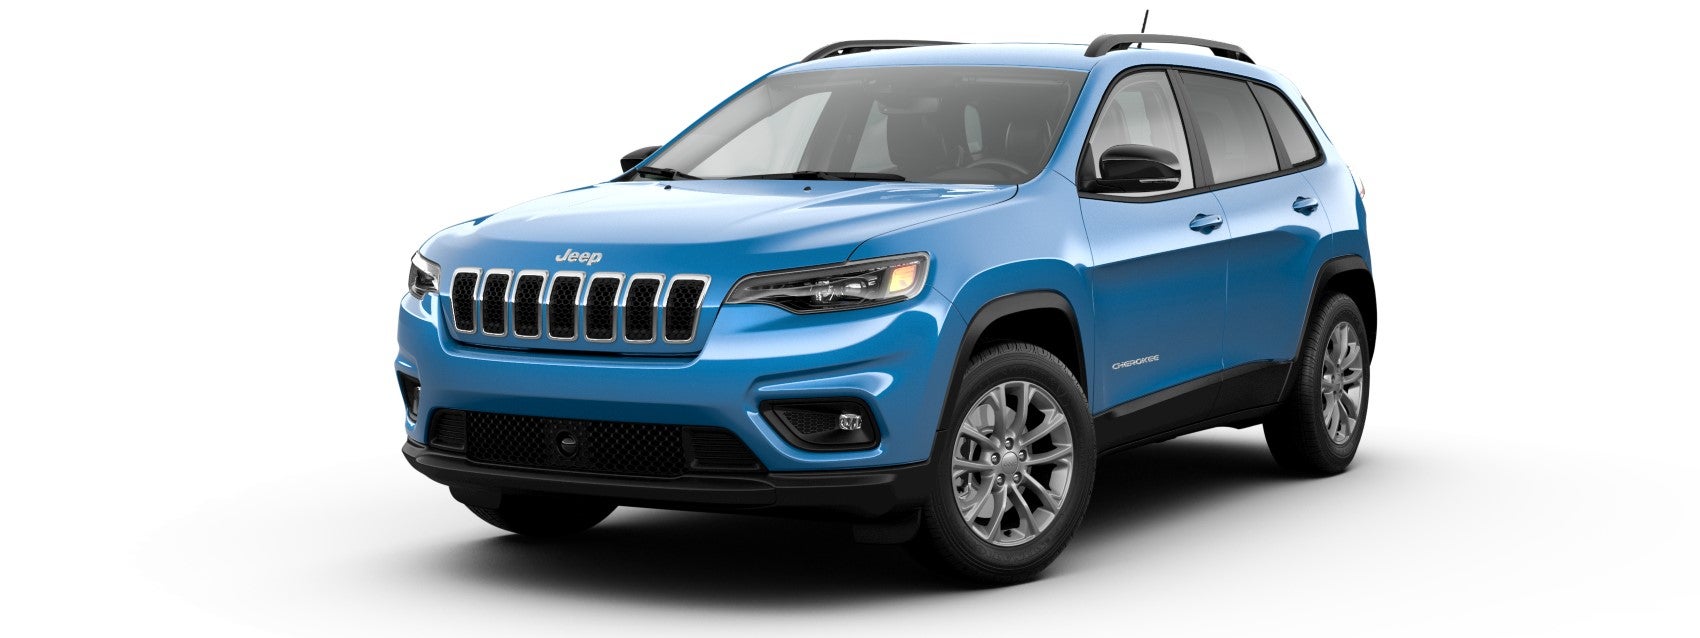 New Jeep Cherokee For Sale